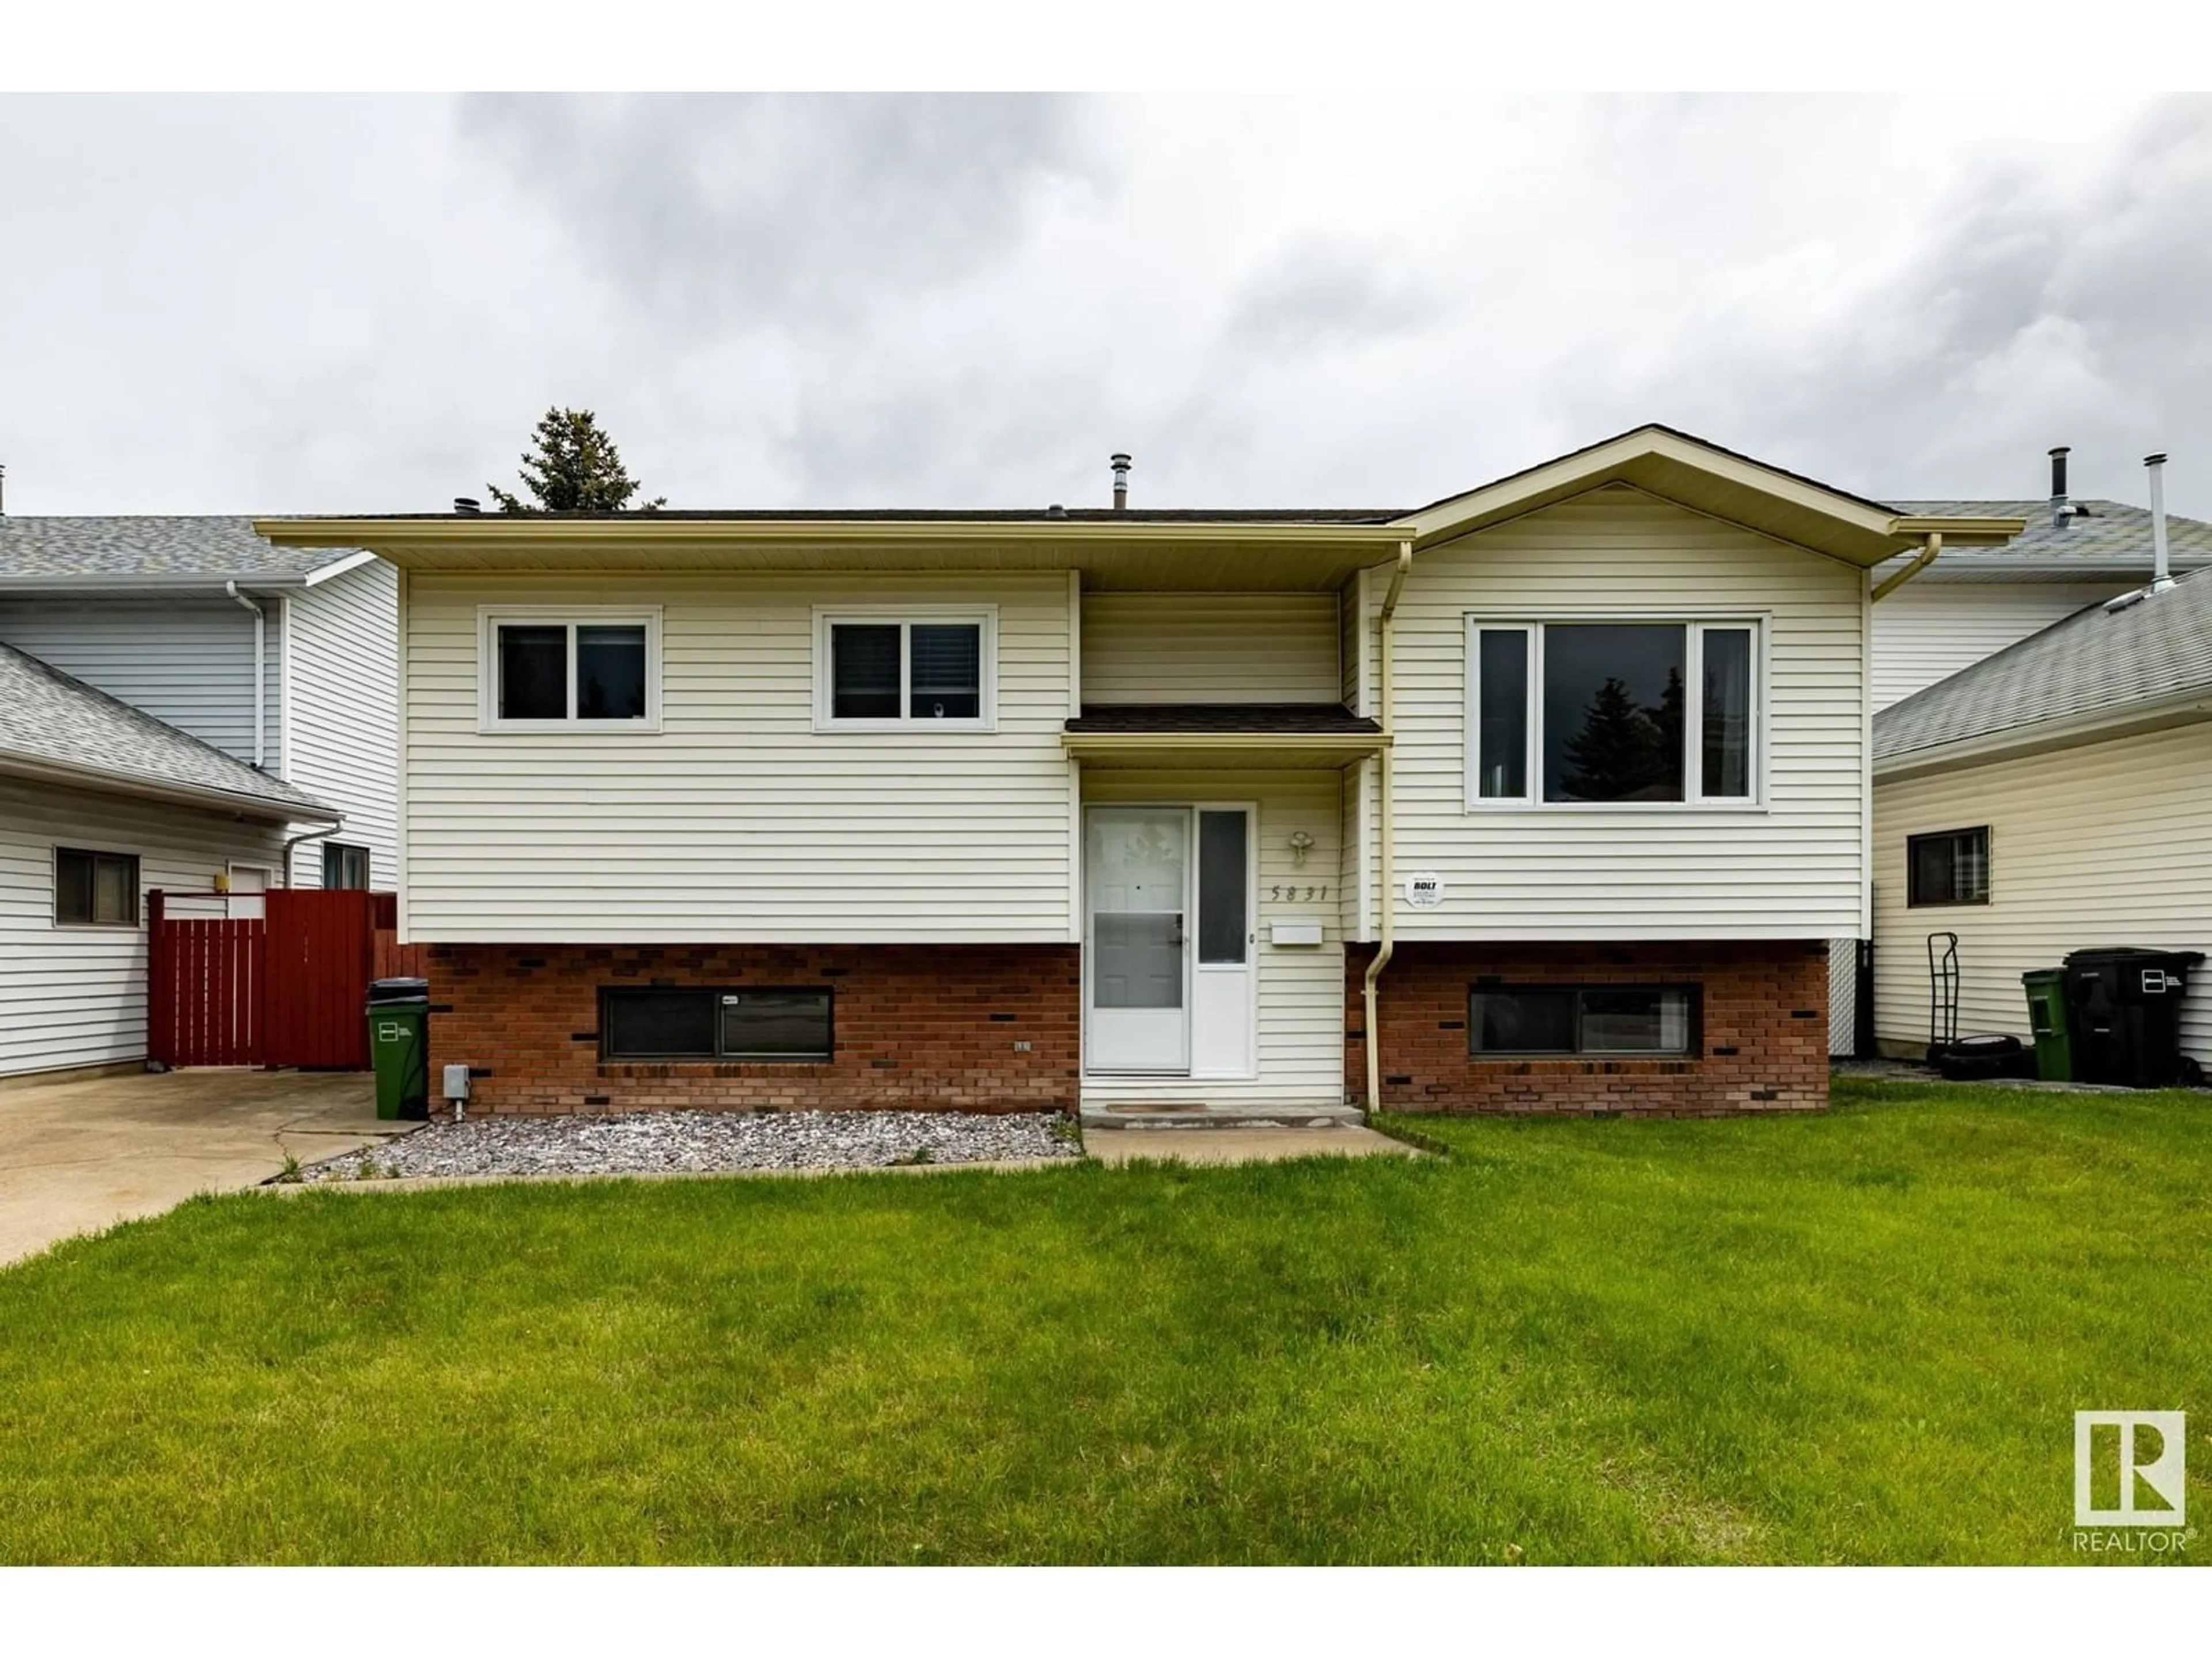 Frontside or backside of a home for 5831 185 ST NW, Edmonton Alberta T6M1X9